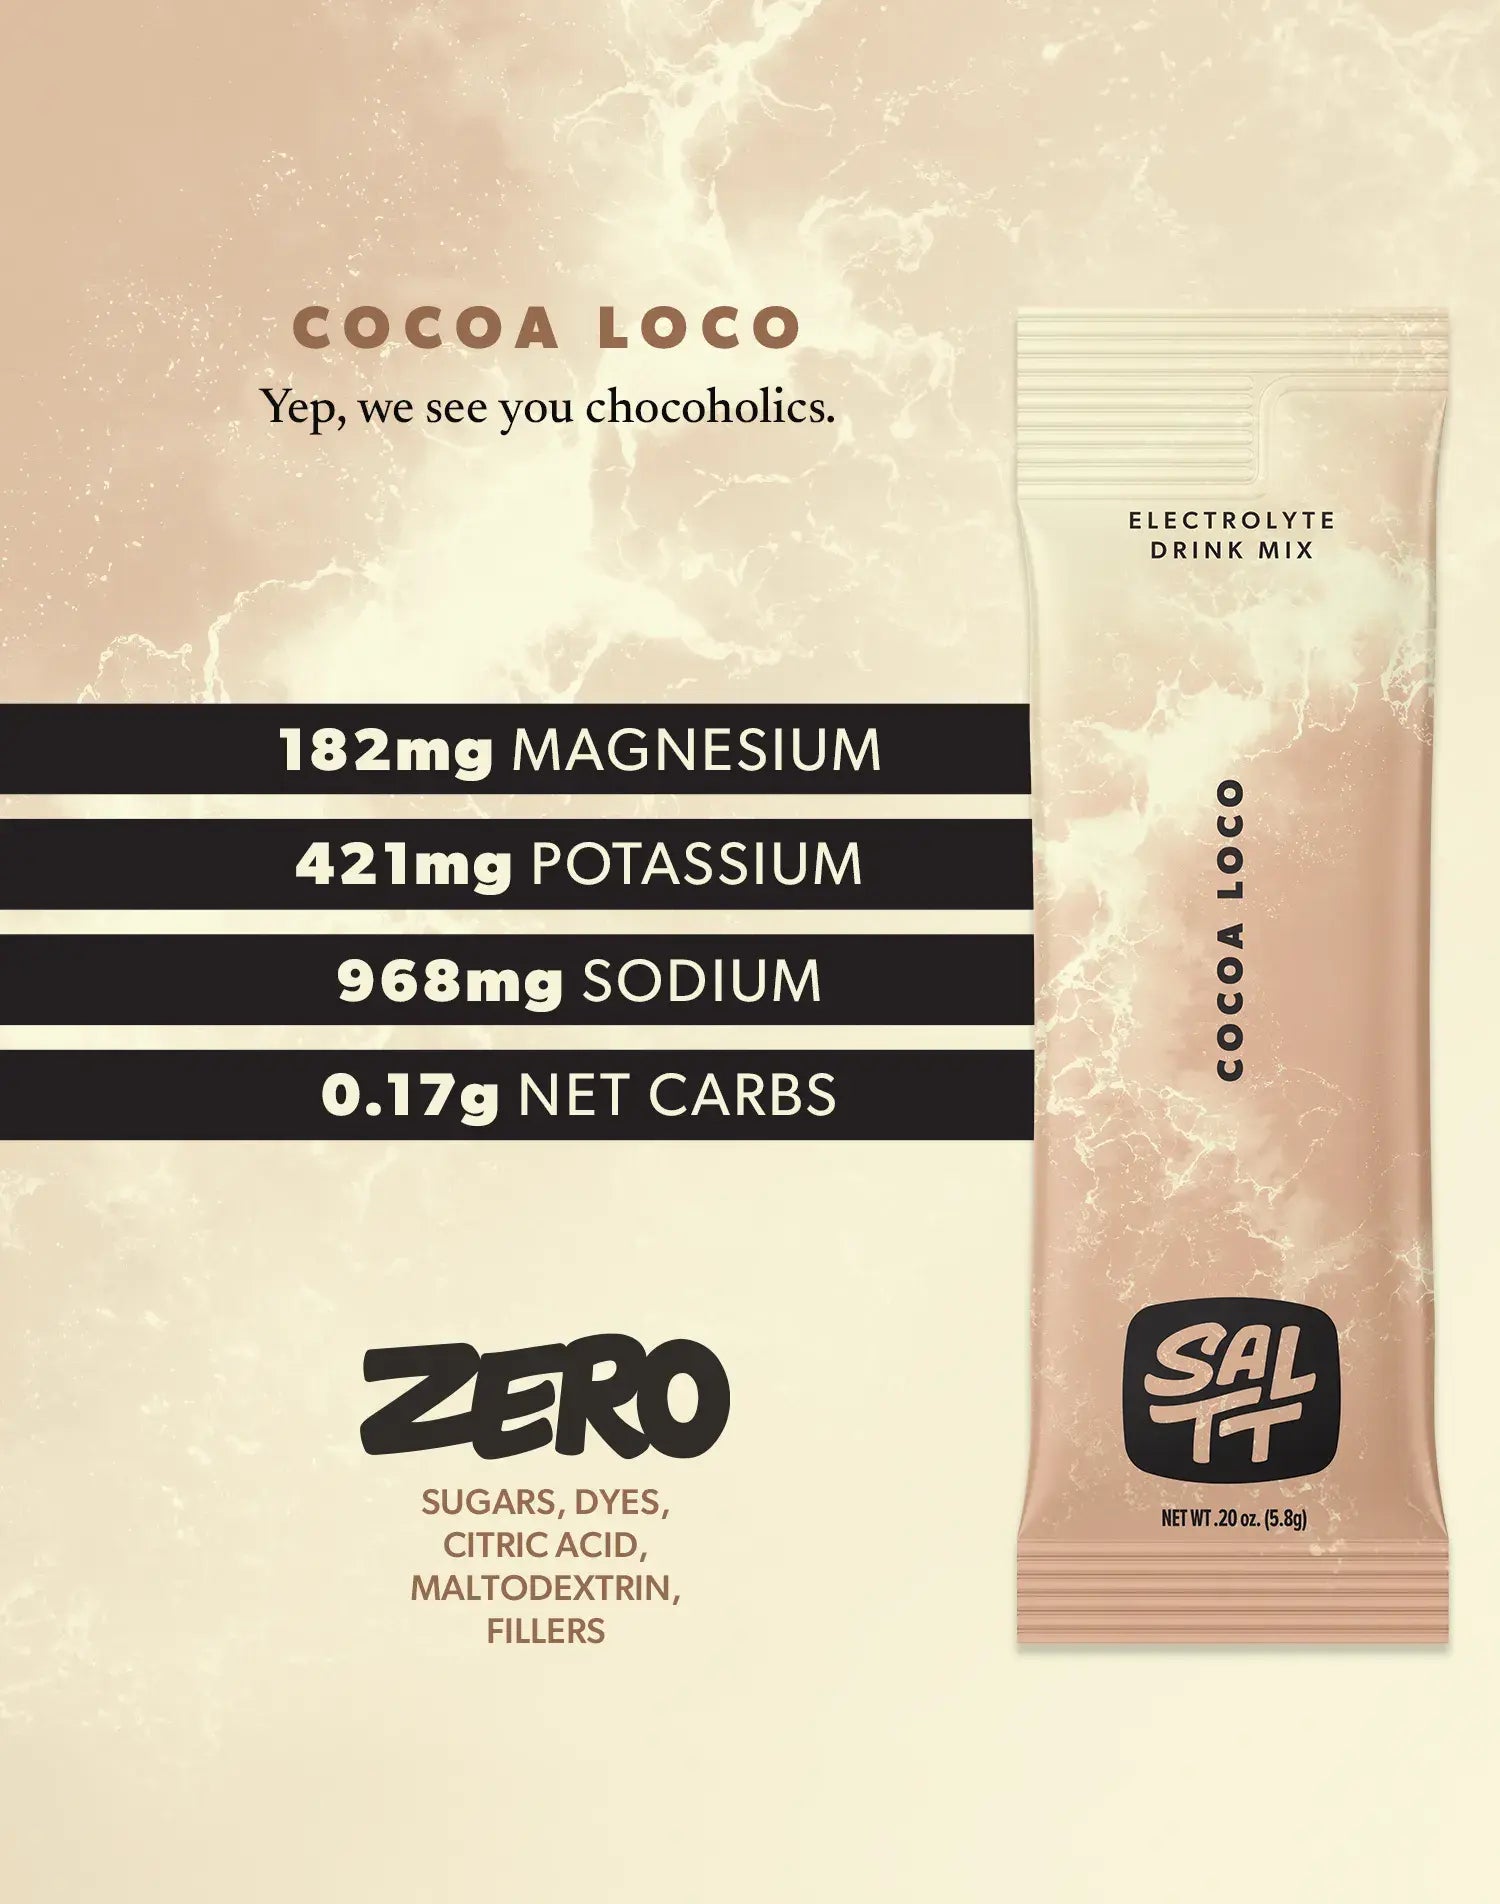 Nutrition for Cocoa Loco flavor. Cocoa Loco has 182mg Magnesium, 421mg Potassium, 968mg Sodium, 0.17g net carbs. Zero sugars, dyes, citric acid, maltodextrin, or fillers. See nutrition dropdown for complete supplement facts.